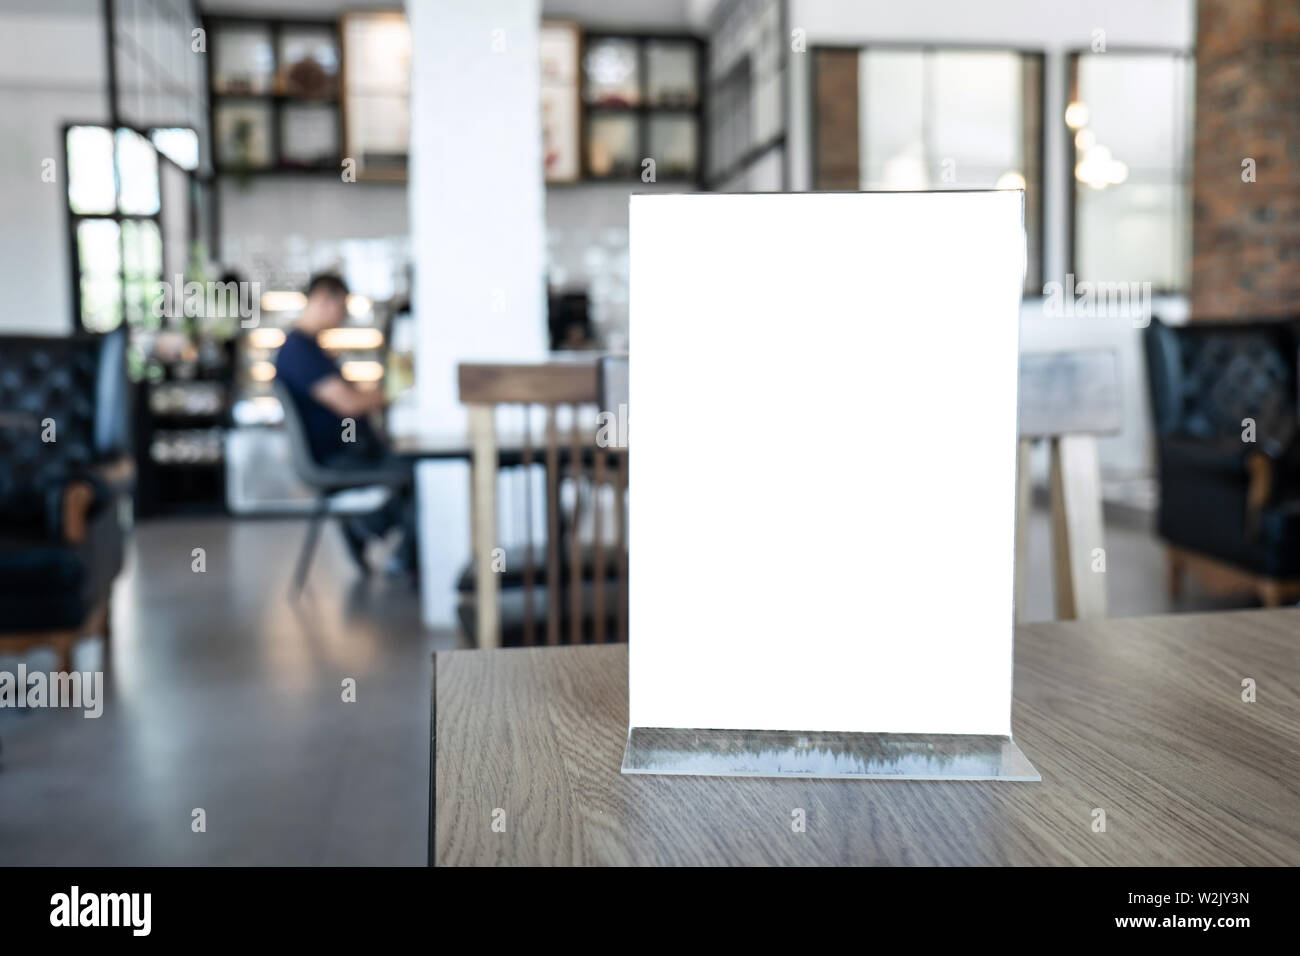 Blank screen mock up menu frame standing on wood table in coffee cafe and restaurant background with people. Stock Photo